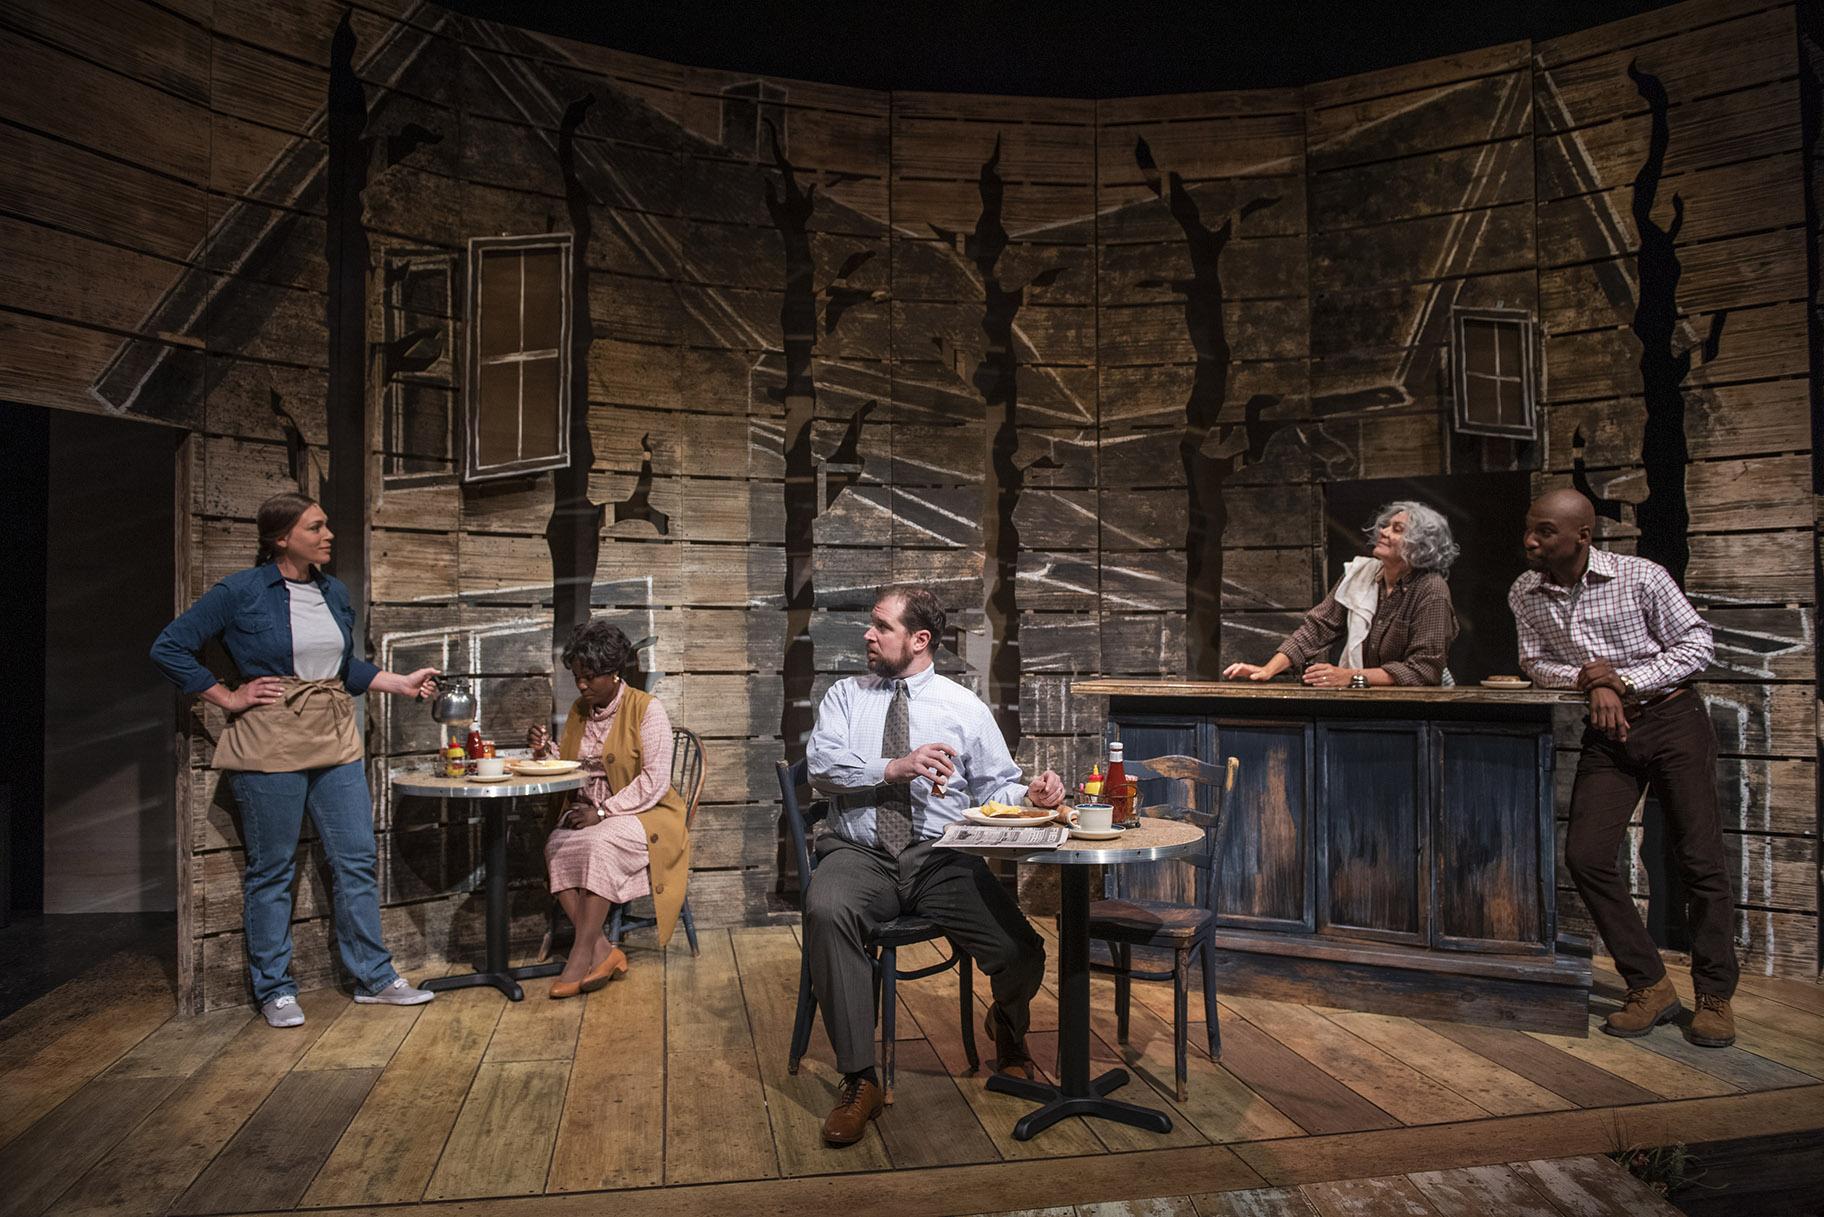 From left: Jacqulyne Jones, Gabrielle Lott-Rogers, Karl Hamilton, Catherine Smitko and Donterrio Johnson in “The Spitfire Grill.” (Photo by Michael Brosilow)